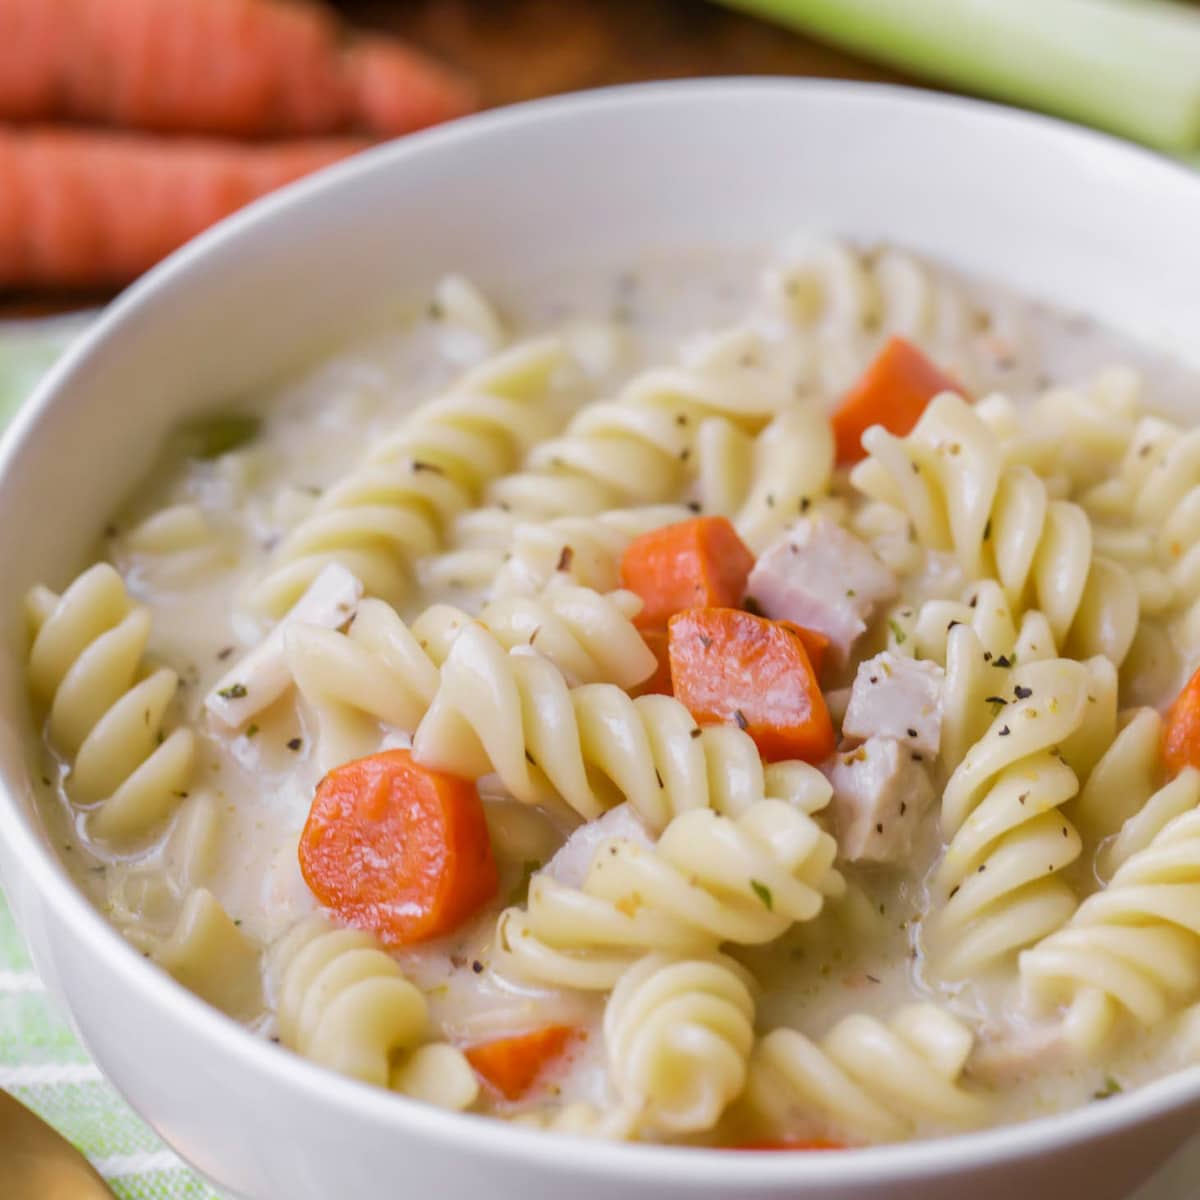 Fall soup recipes - Turkey noodle soup served in a white bowl.